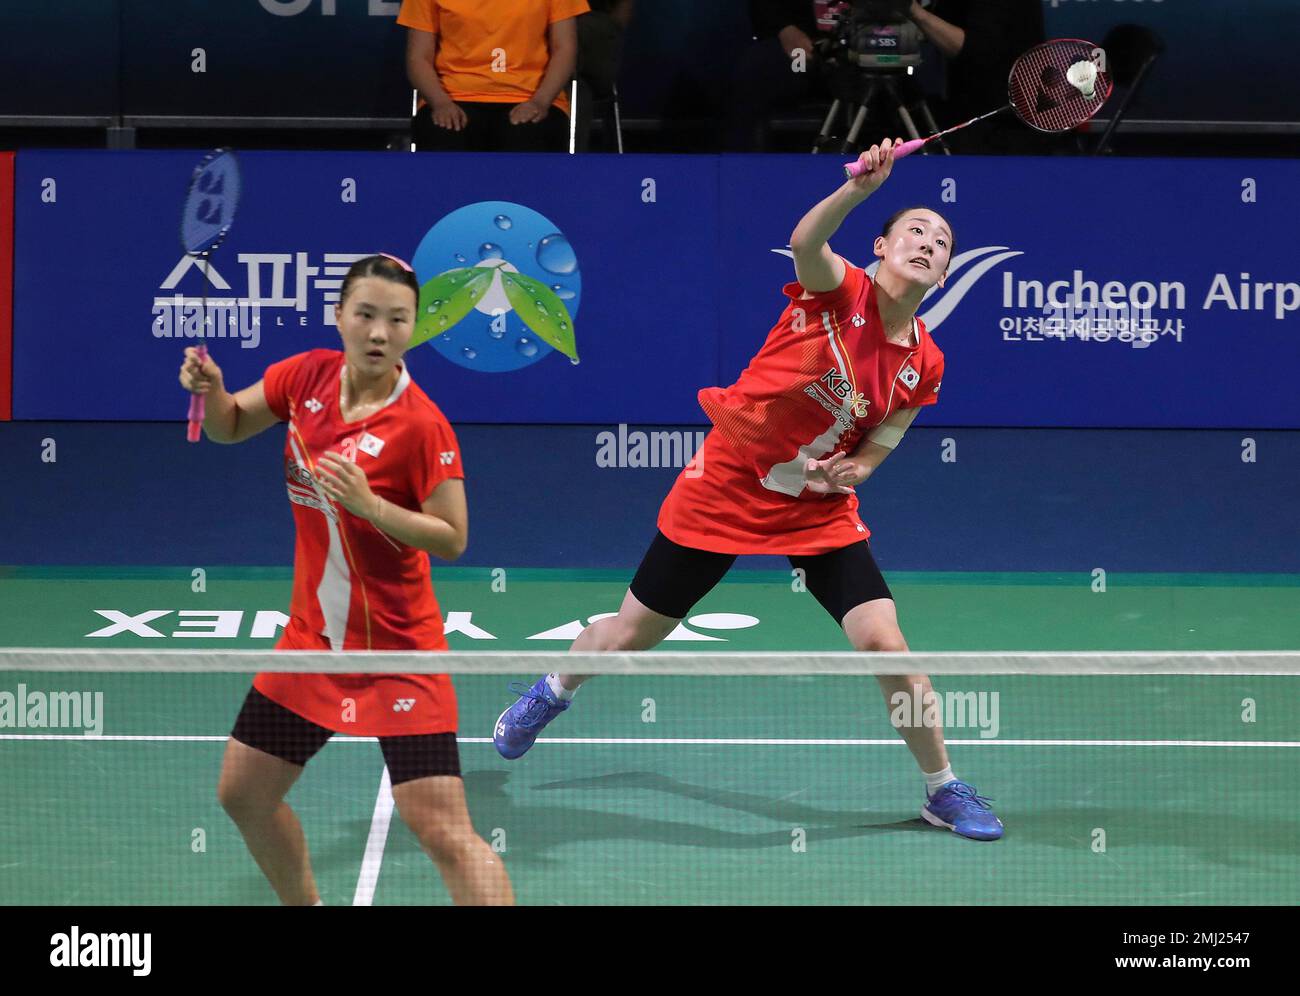 South Koreas Lee So-hee, right, returns a shot as her teammate Shin Seun-chan stands during the womens doubles semi-final match against Japans Nami Matsuyama and Chiharu Shida at the Korea Open Badminton